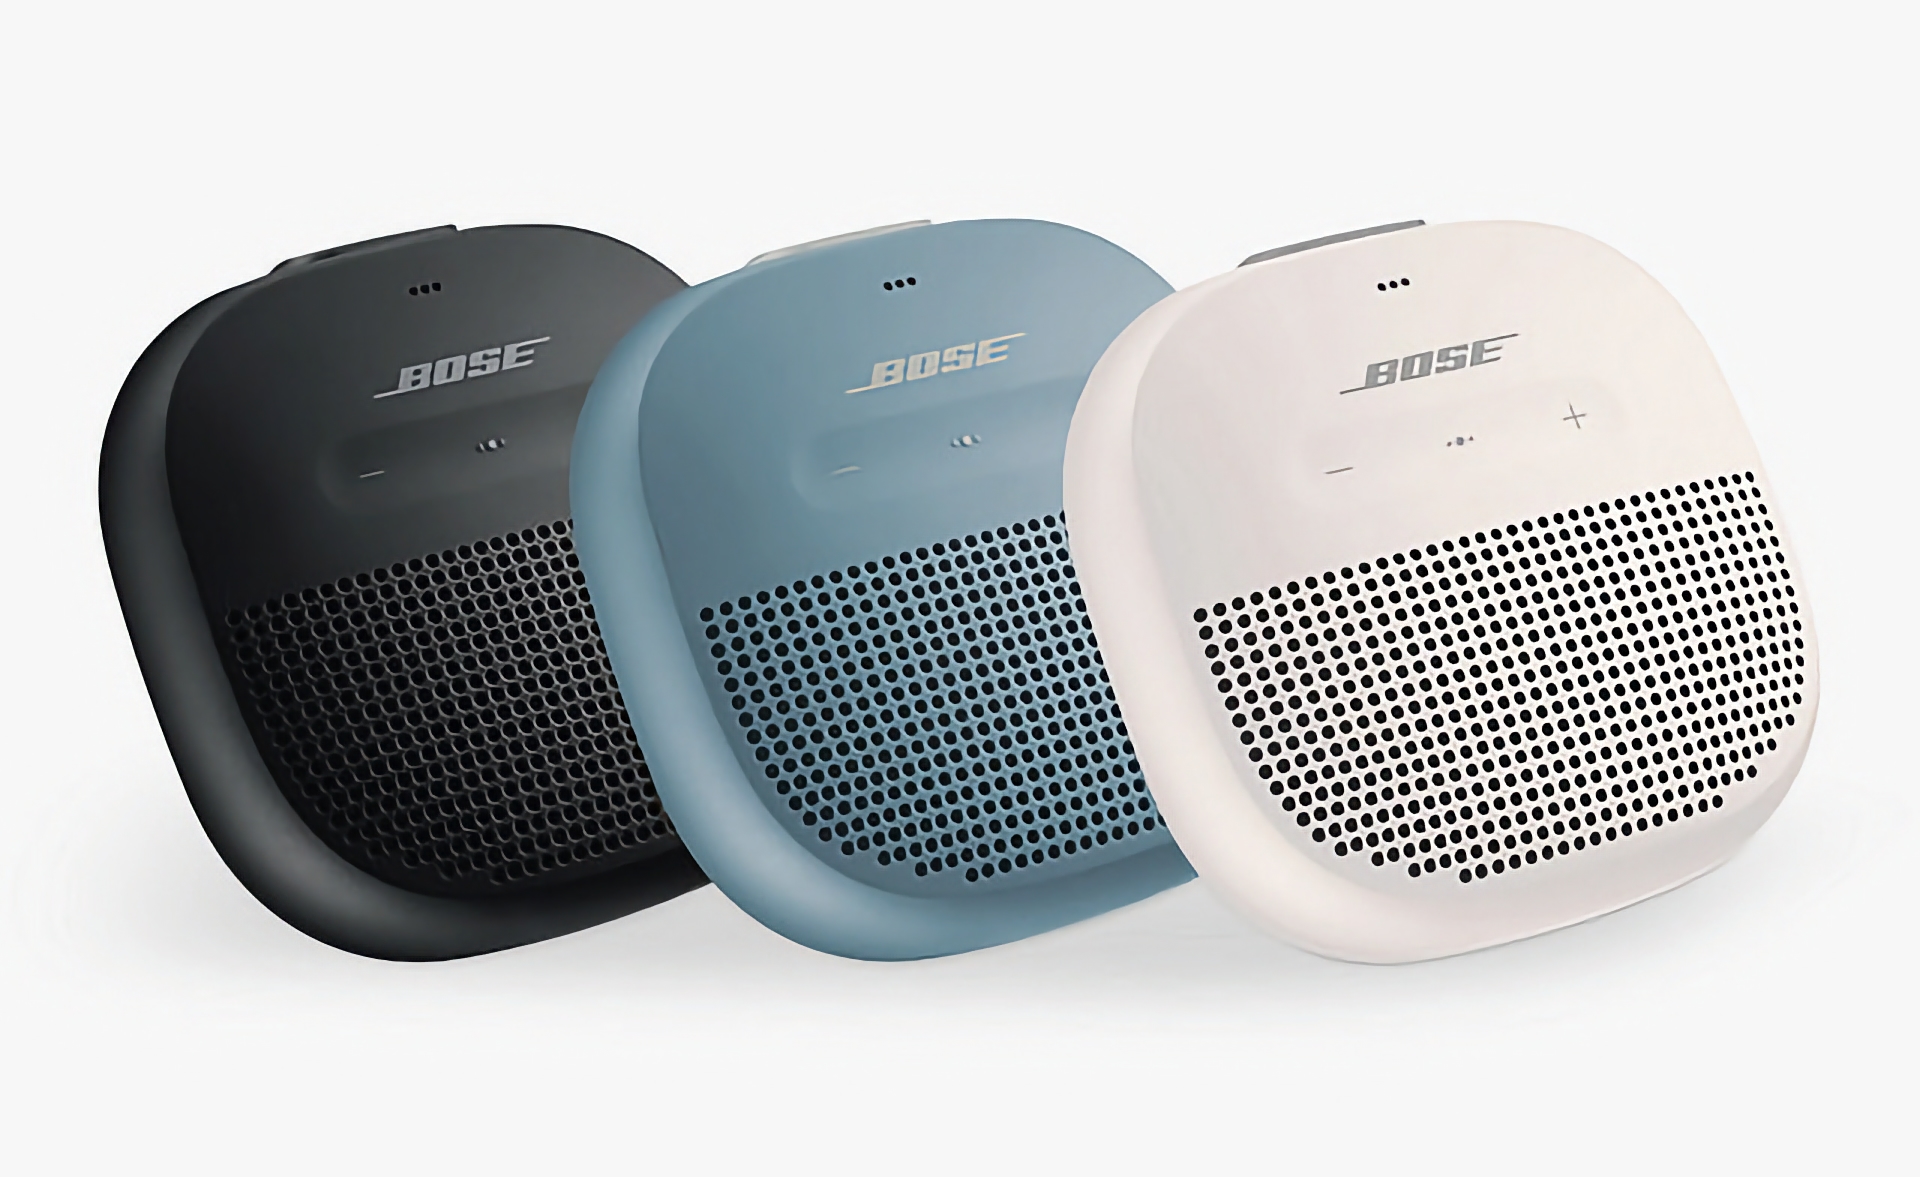 The Bose SoundLink Micro with IP67 protection and up to 6 hours of battery life is available on Amazon for $99 ($20 off)